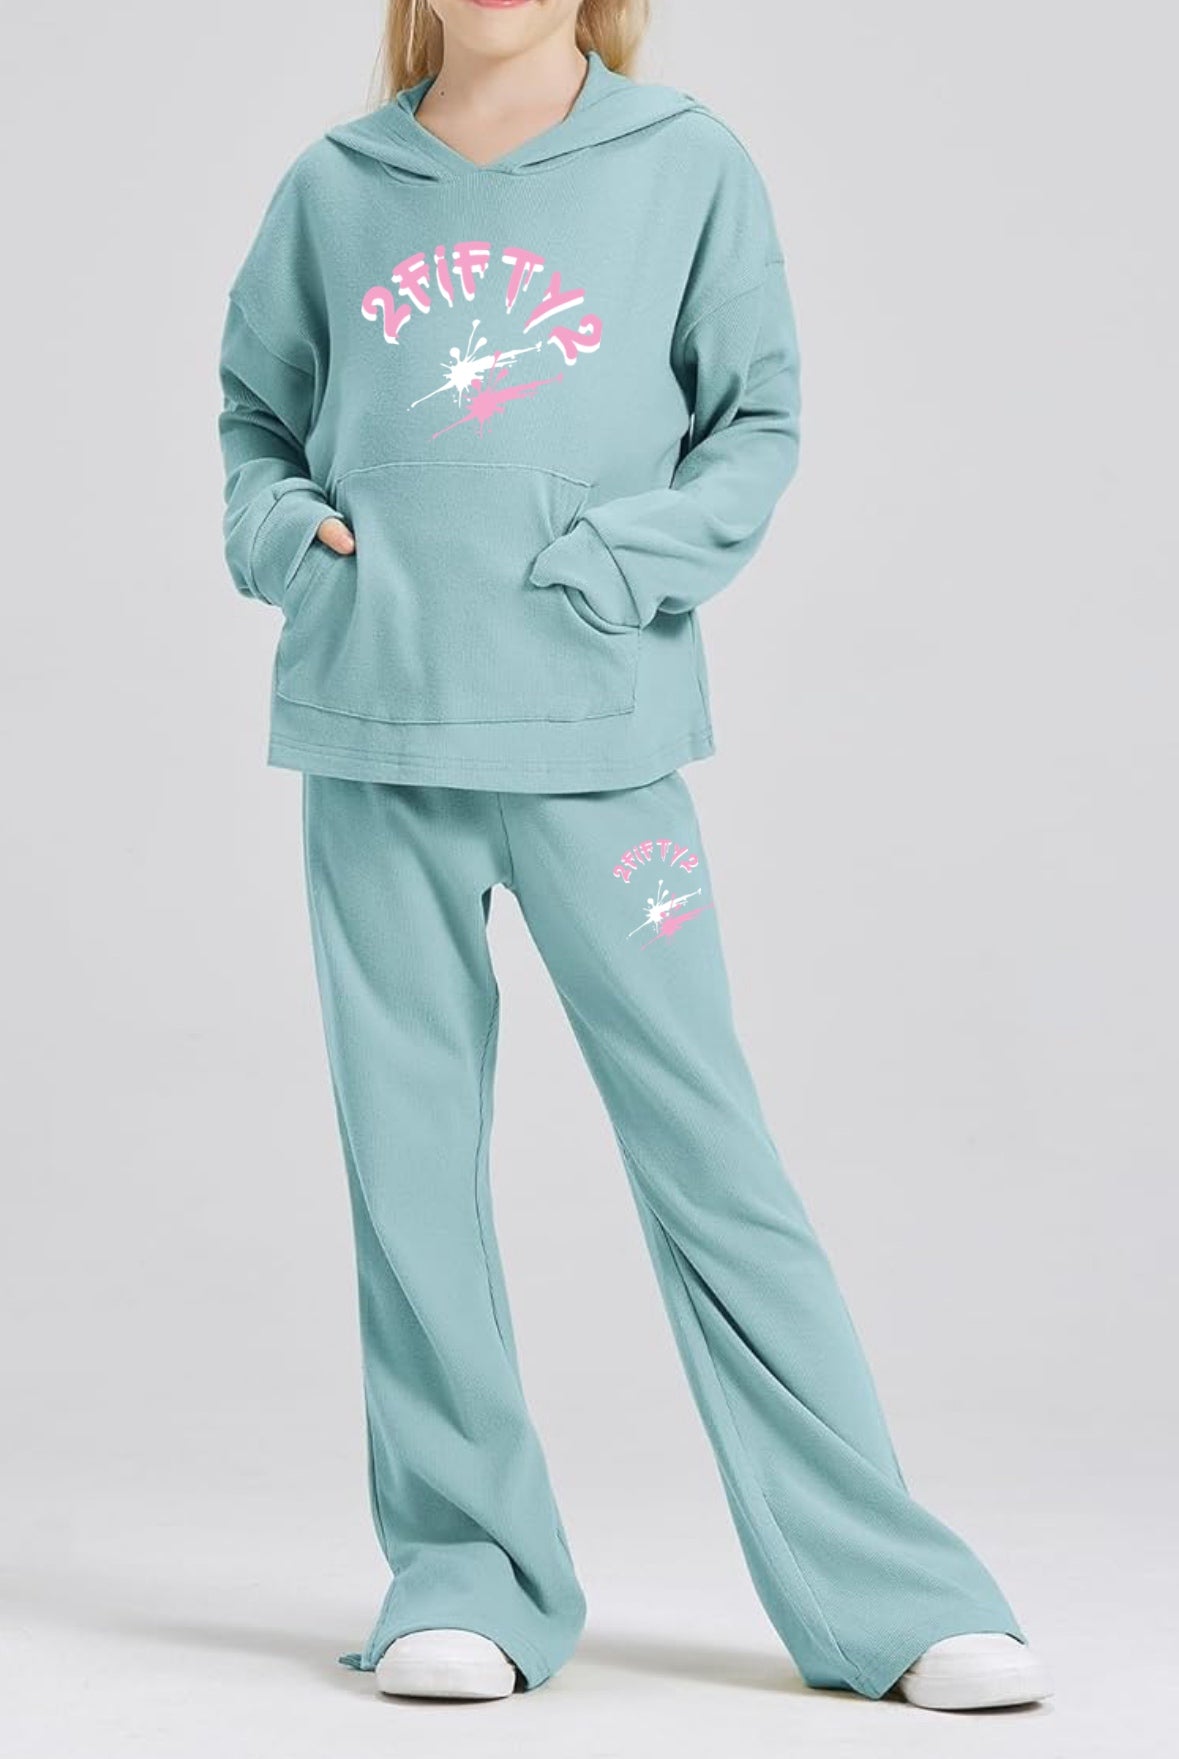 Girls flare bottoms 2 piece sweatsuit by 2fifty2